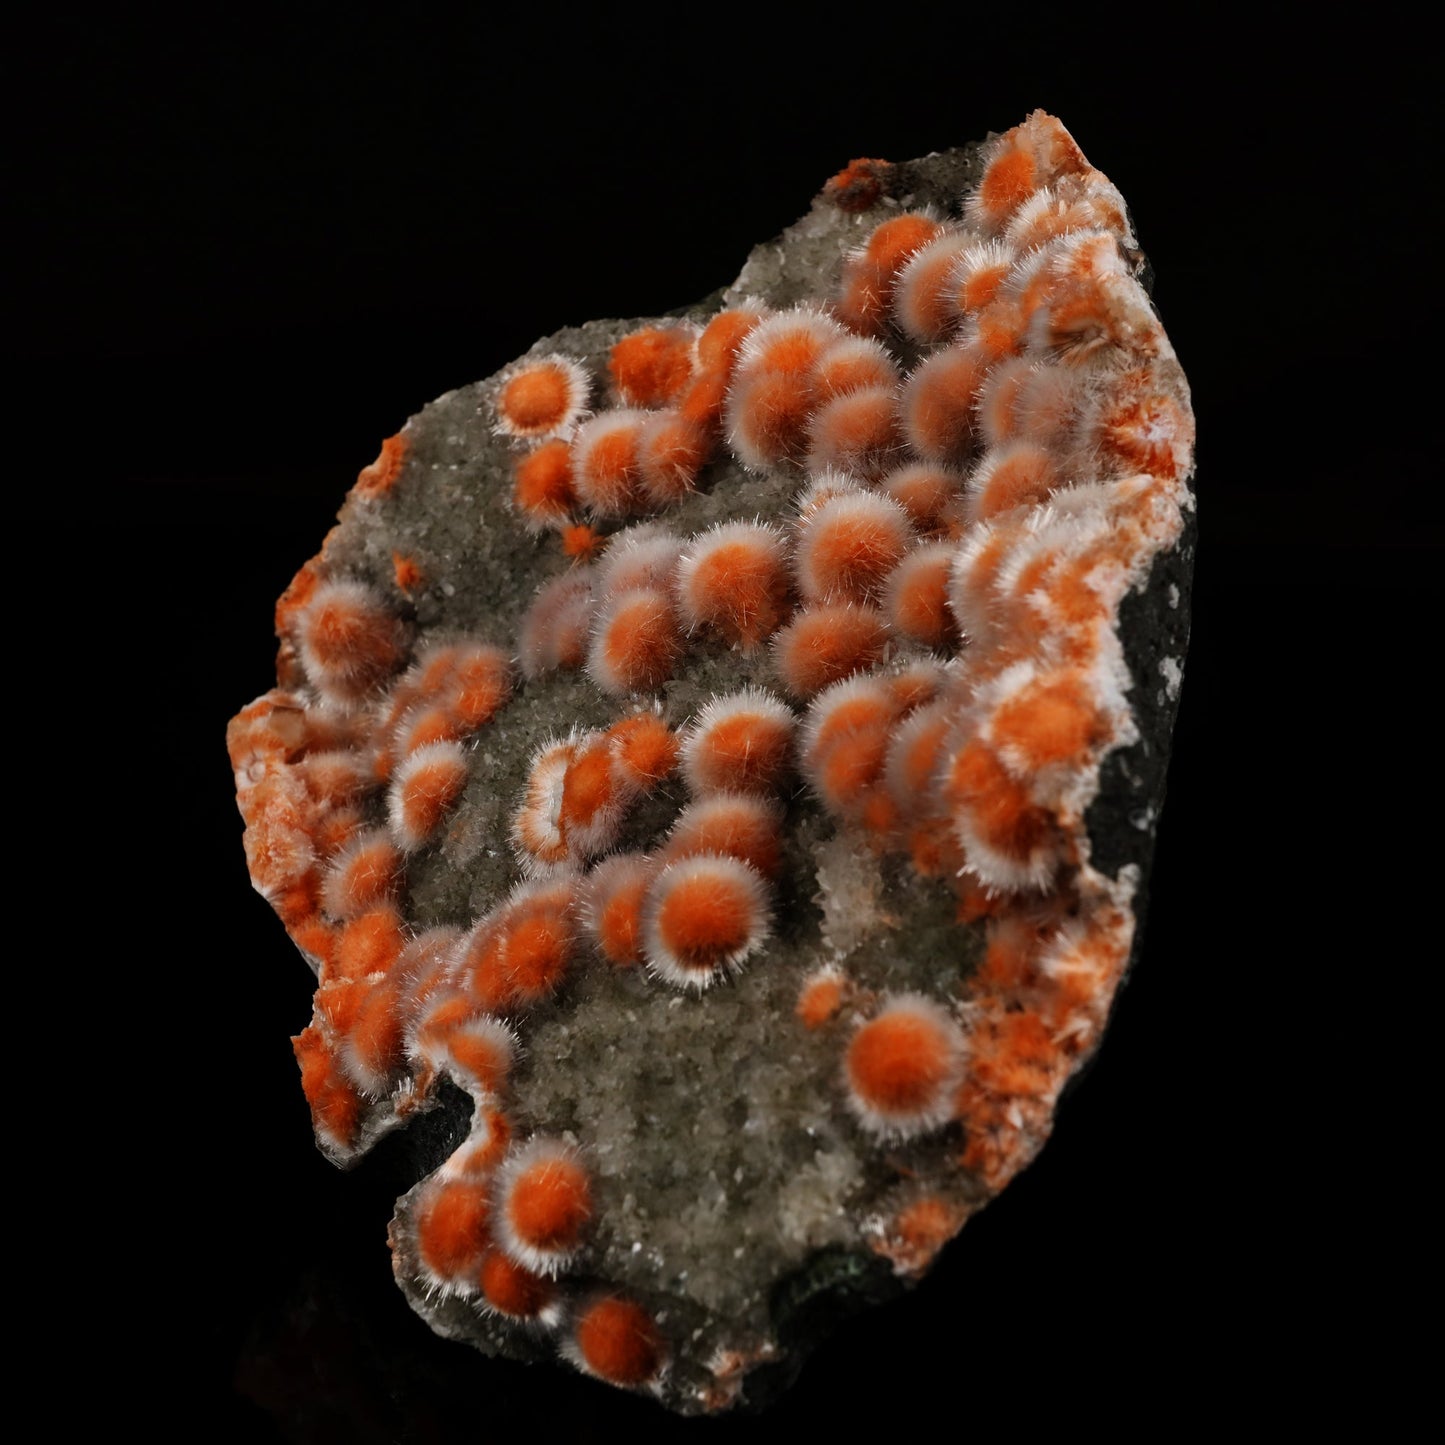 Dark orange thomsonite radial formations with hair-thin mesolite across the surface on a heulandite matrix.